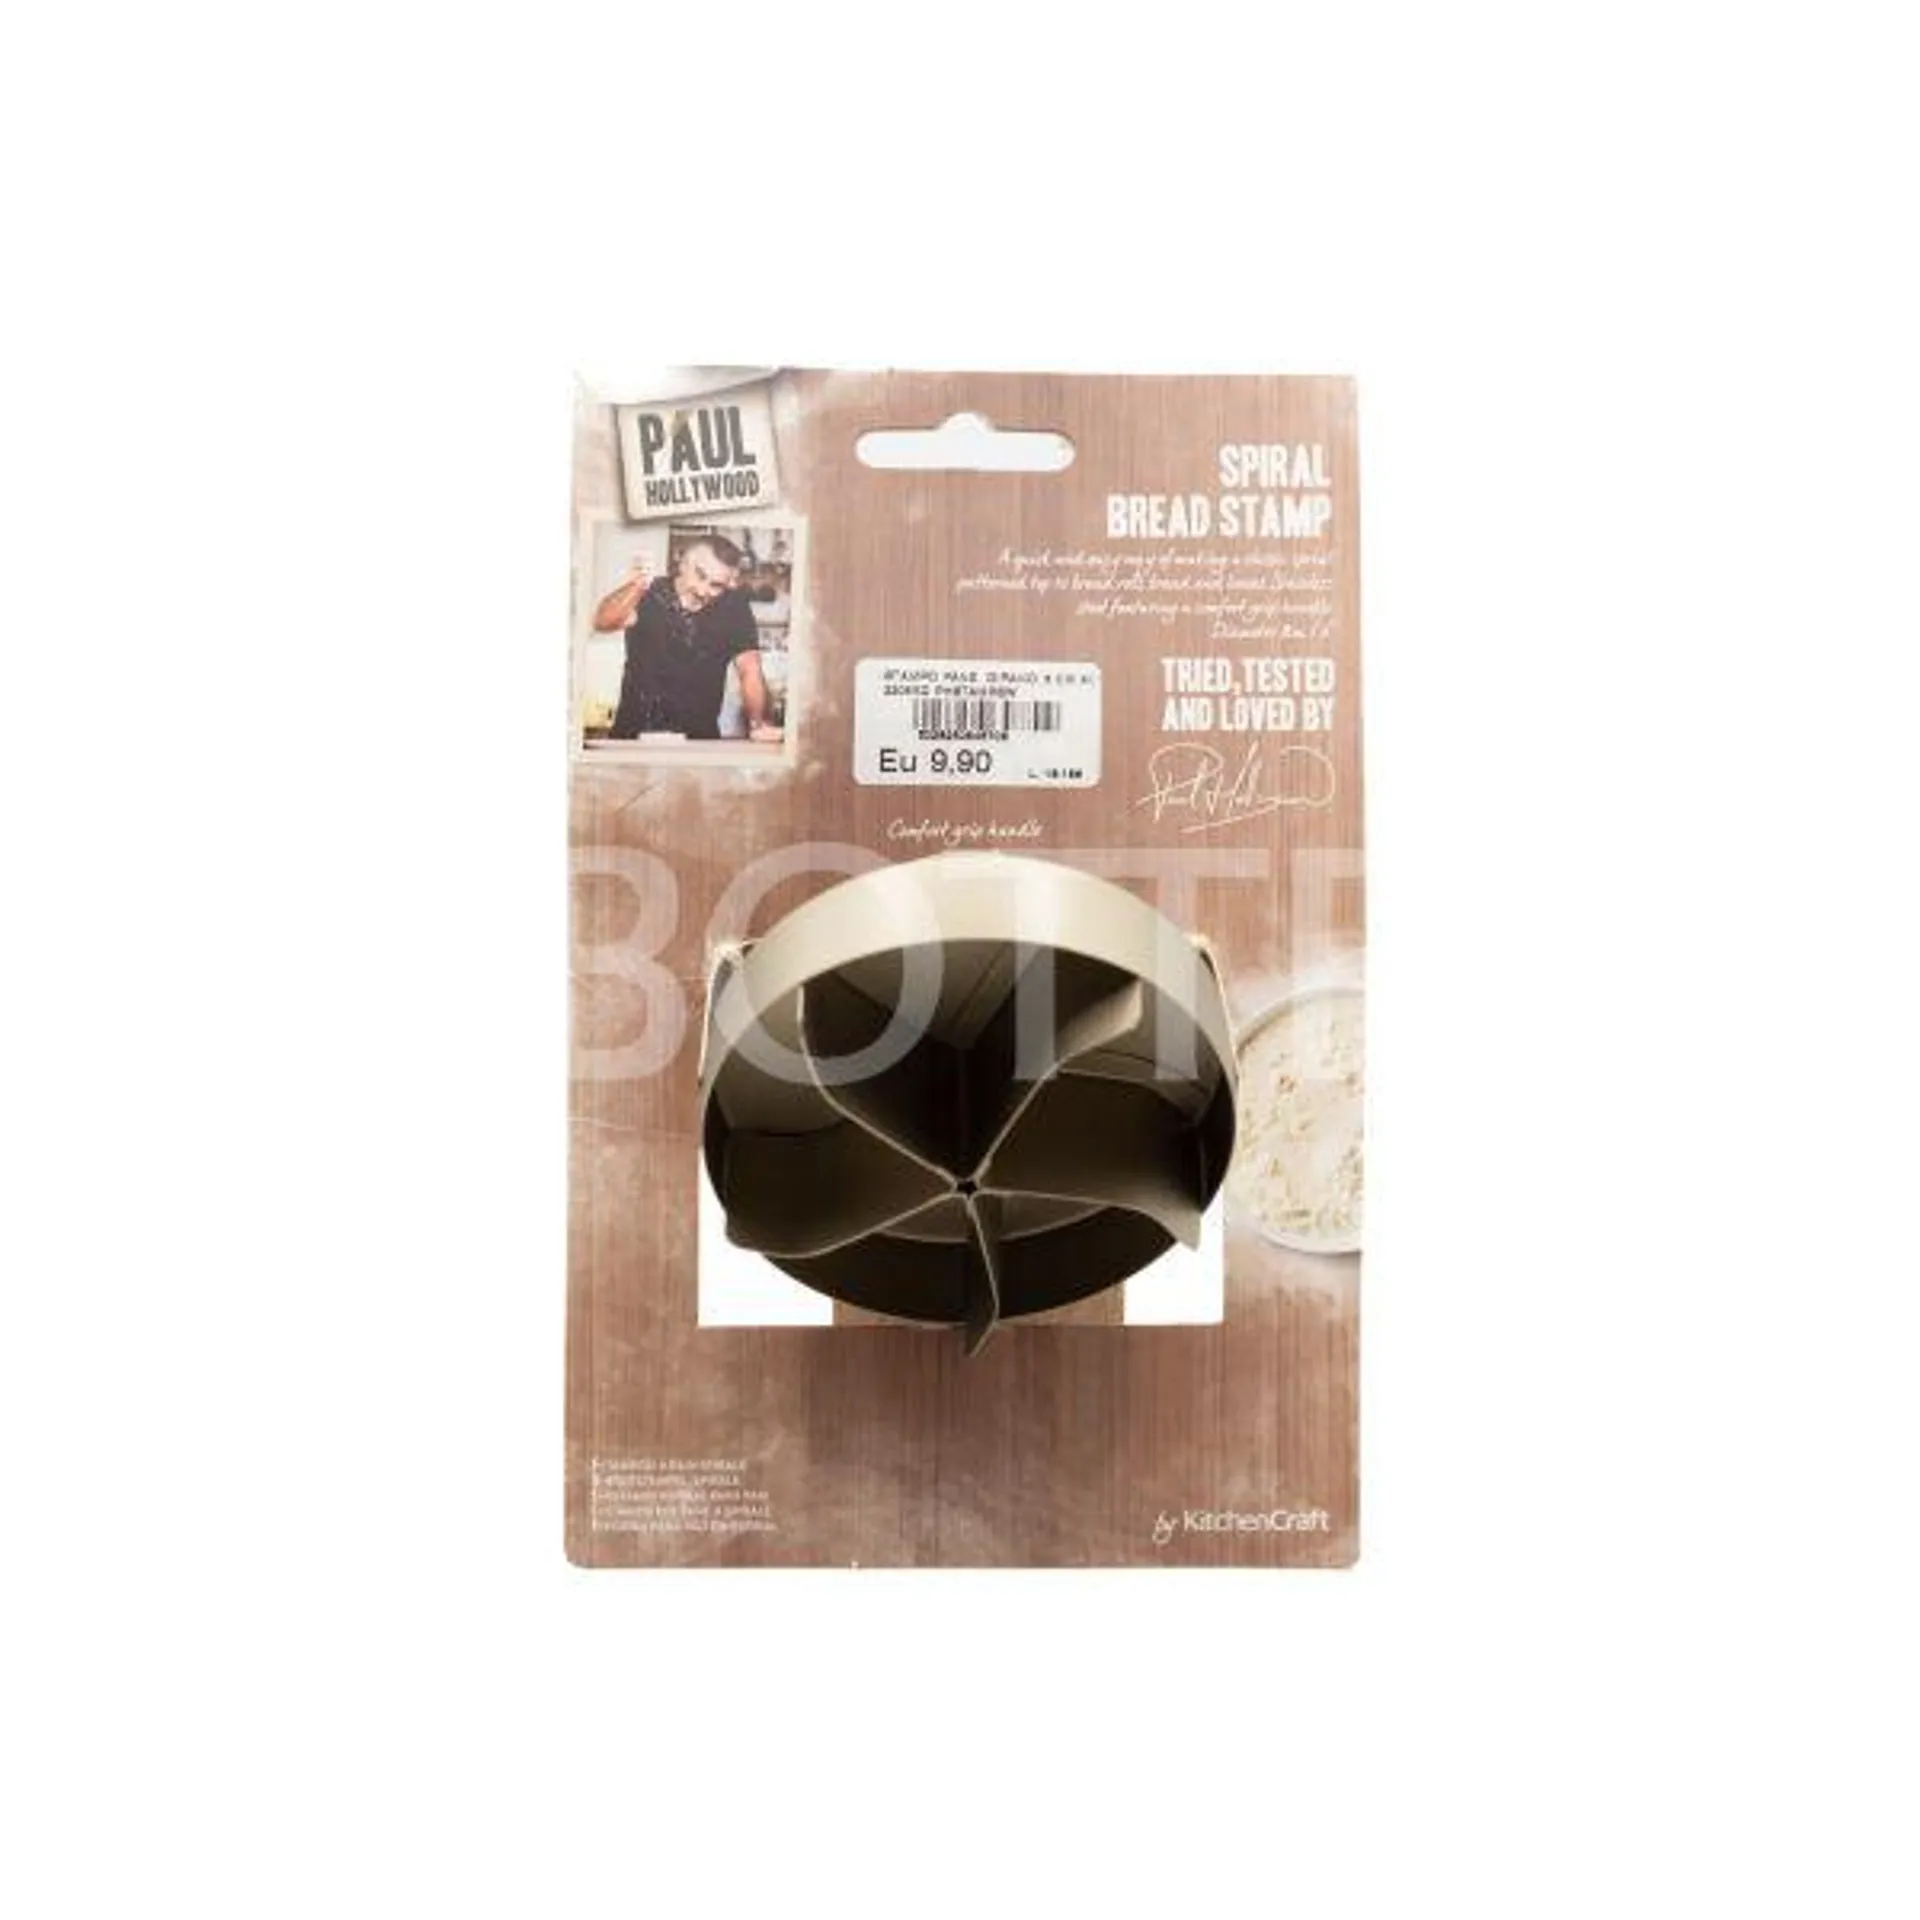 Stampo per Pane a Spirale Paul Hollywood by KitchenCraft